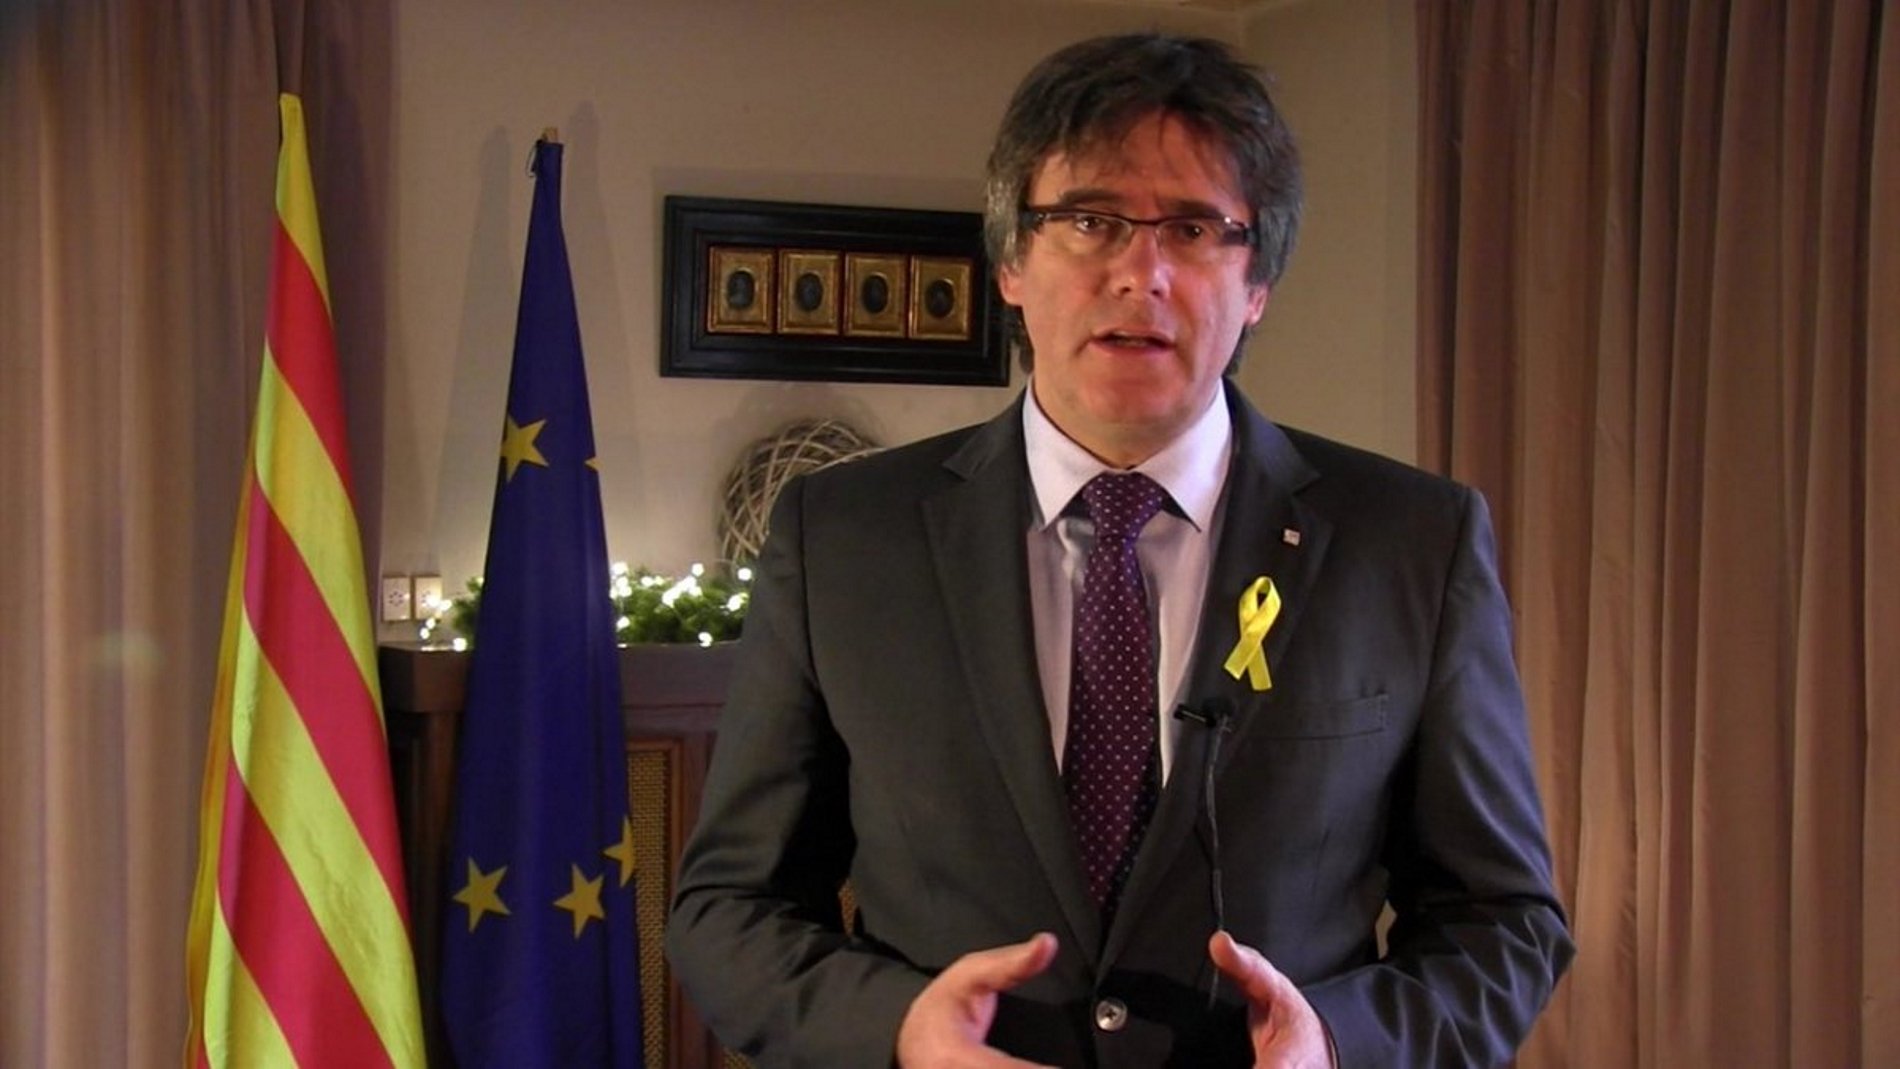 The BBC sees Puigdemont's nomination as president as "likely"